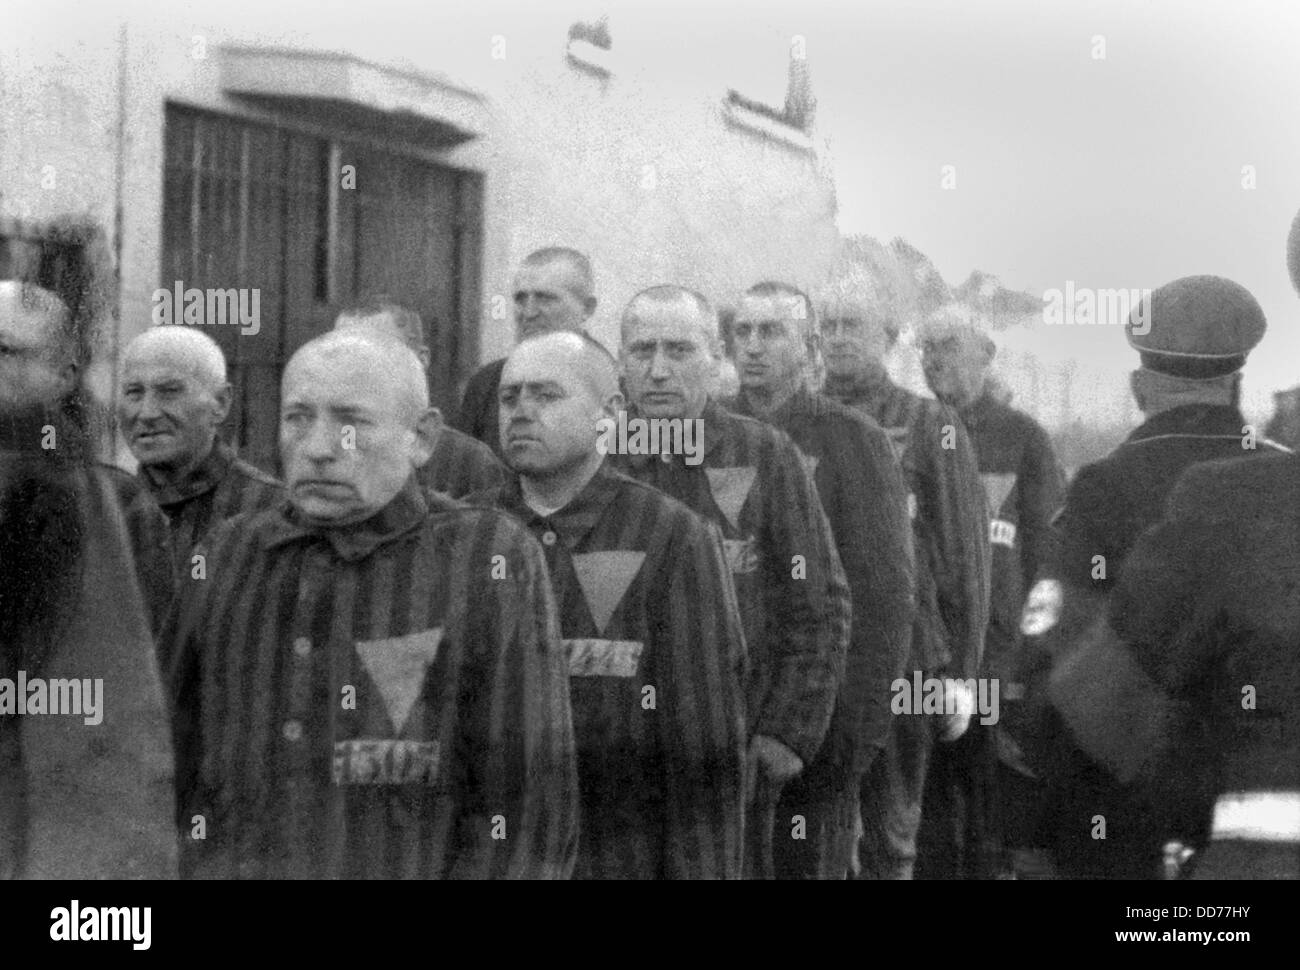 Prisoners in the concentration camp at Sachsenhausen, Germany, Dec. 19, 1938. The political prisoners included anti-Nazi Stock Photo